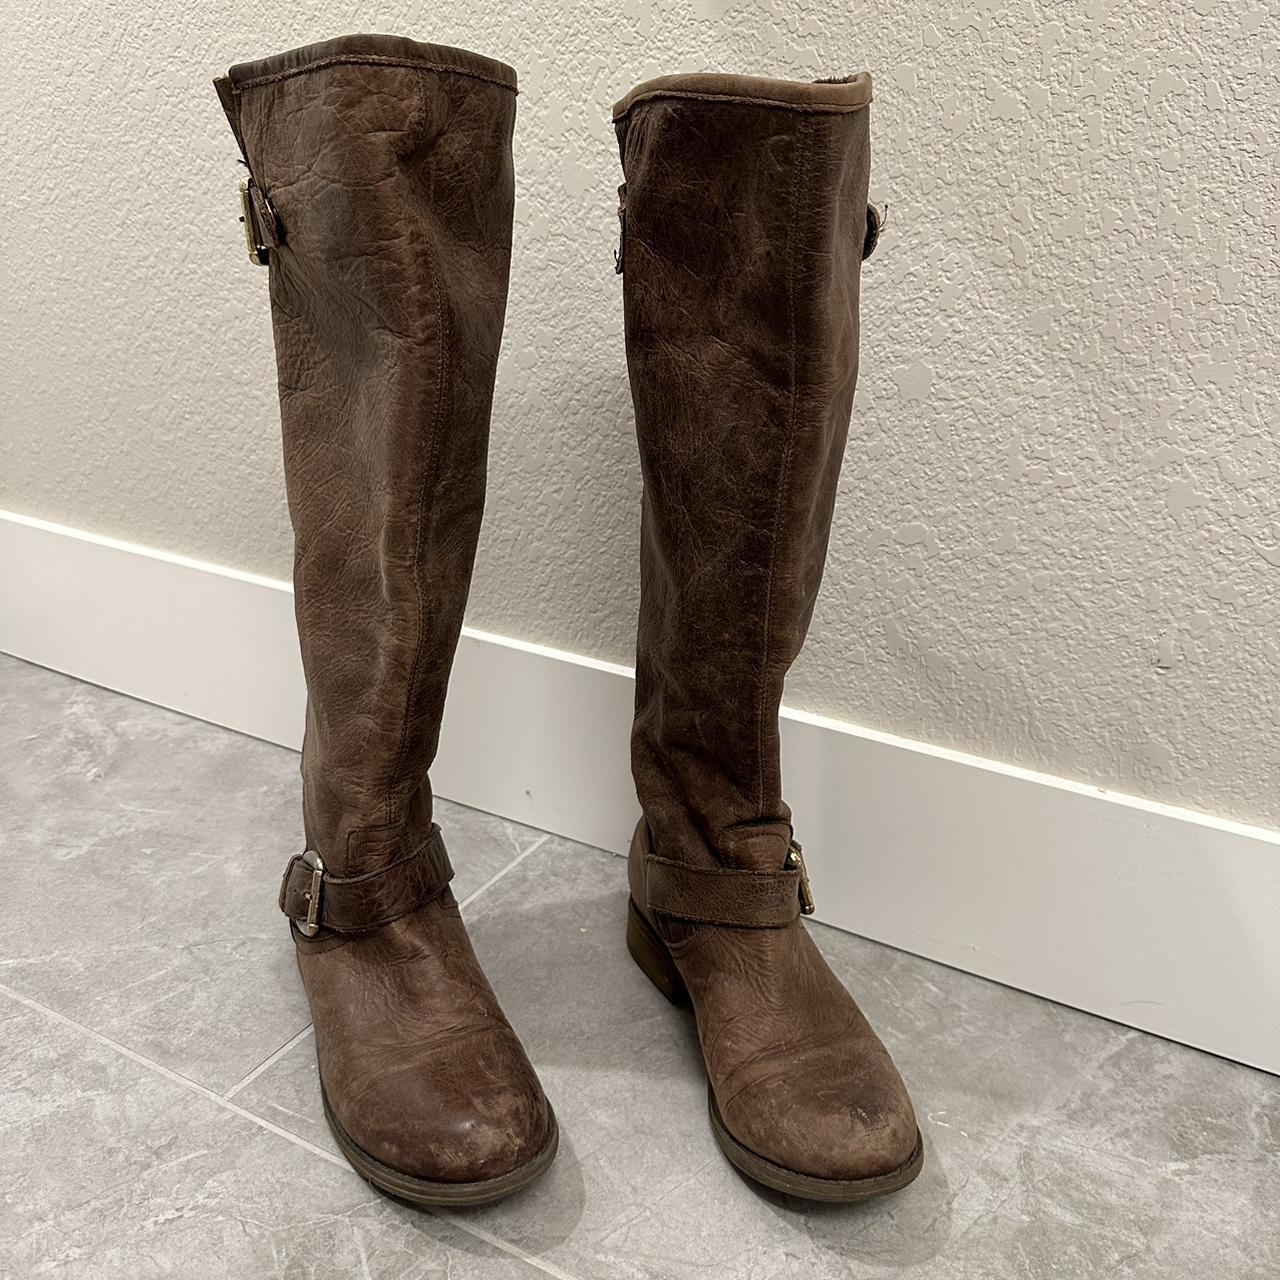 steve madden riding boots with red zipper